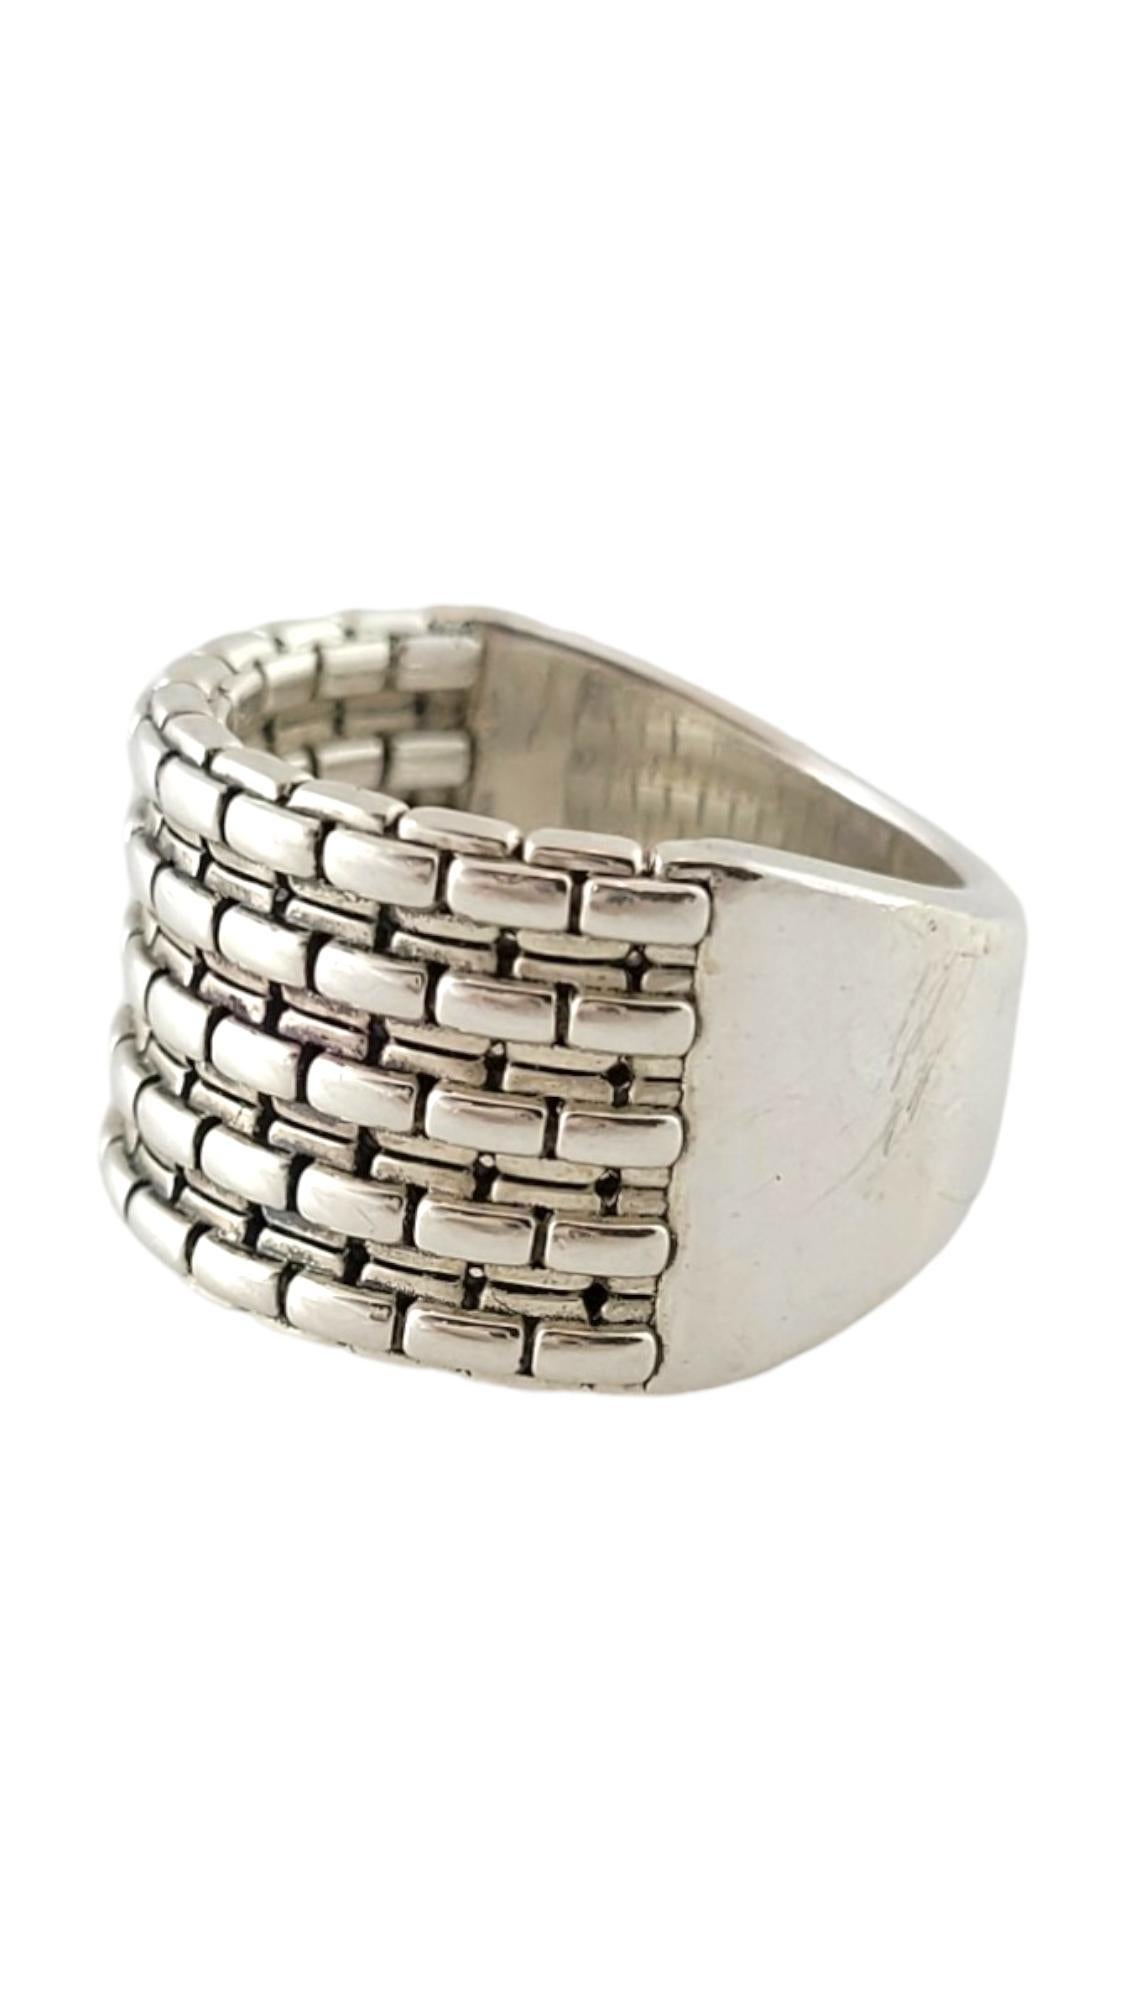 John Hardy Sterling Silver JAi Box Chain Band Size 7

This gorgeous sterling silver band by JAi by John Hardy is in a multi box chain pattern that is going to look great on you!

Ring size: 7
Shank: 6.86mm
Front: 13.06mm

Weight: 8.09 dwt/ 12.58